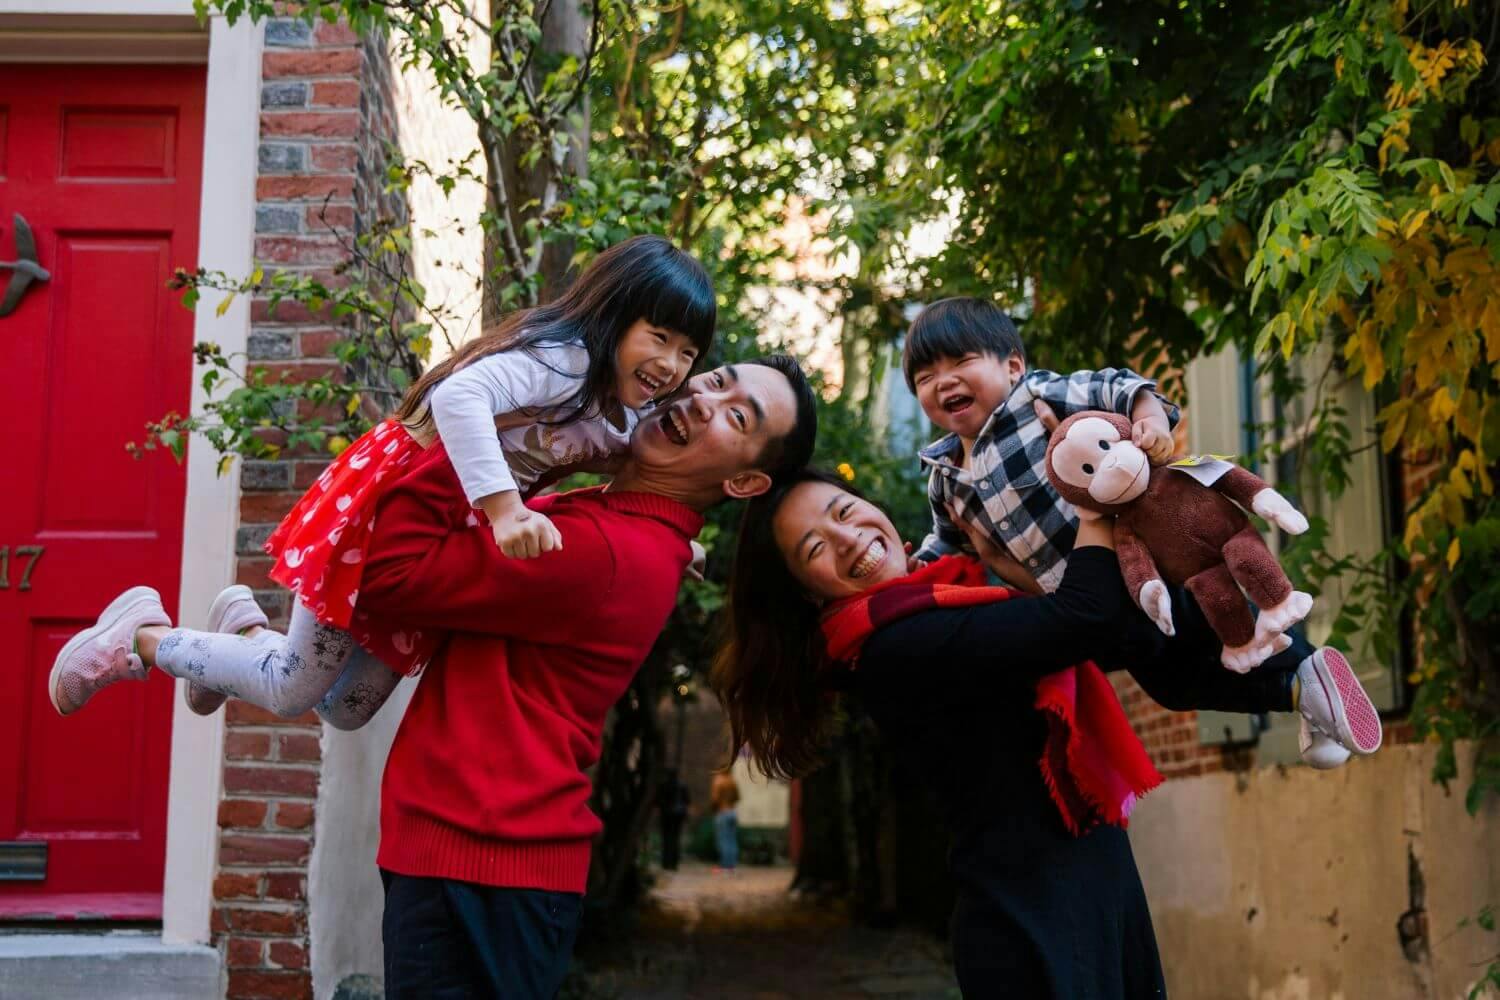 A family of four smiling and playing outside a house with red door